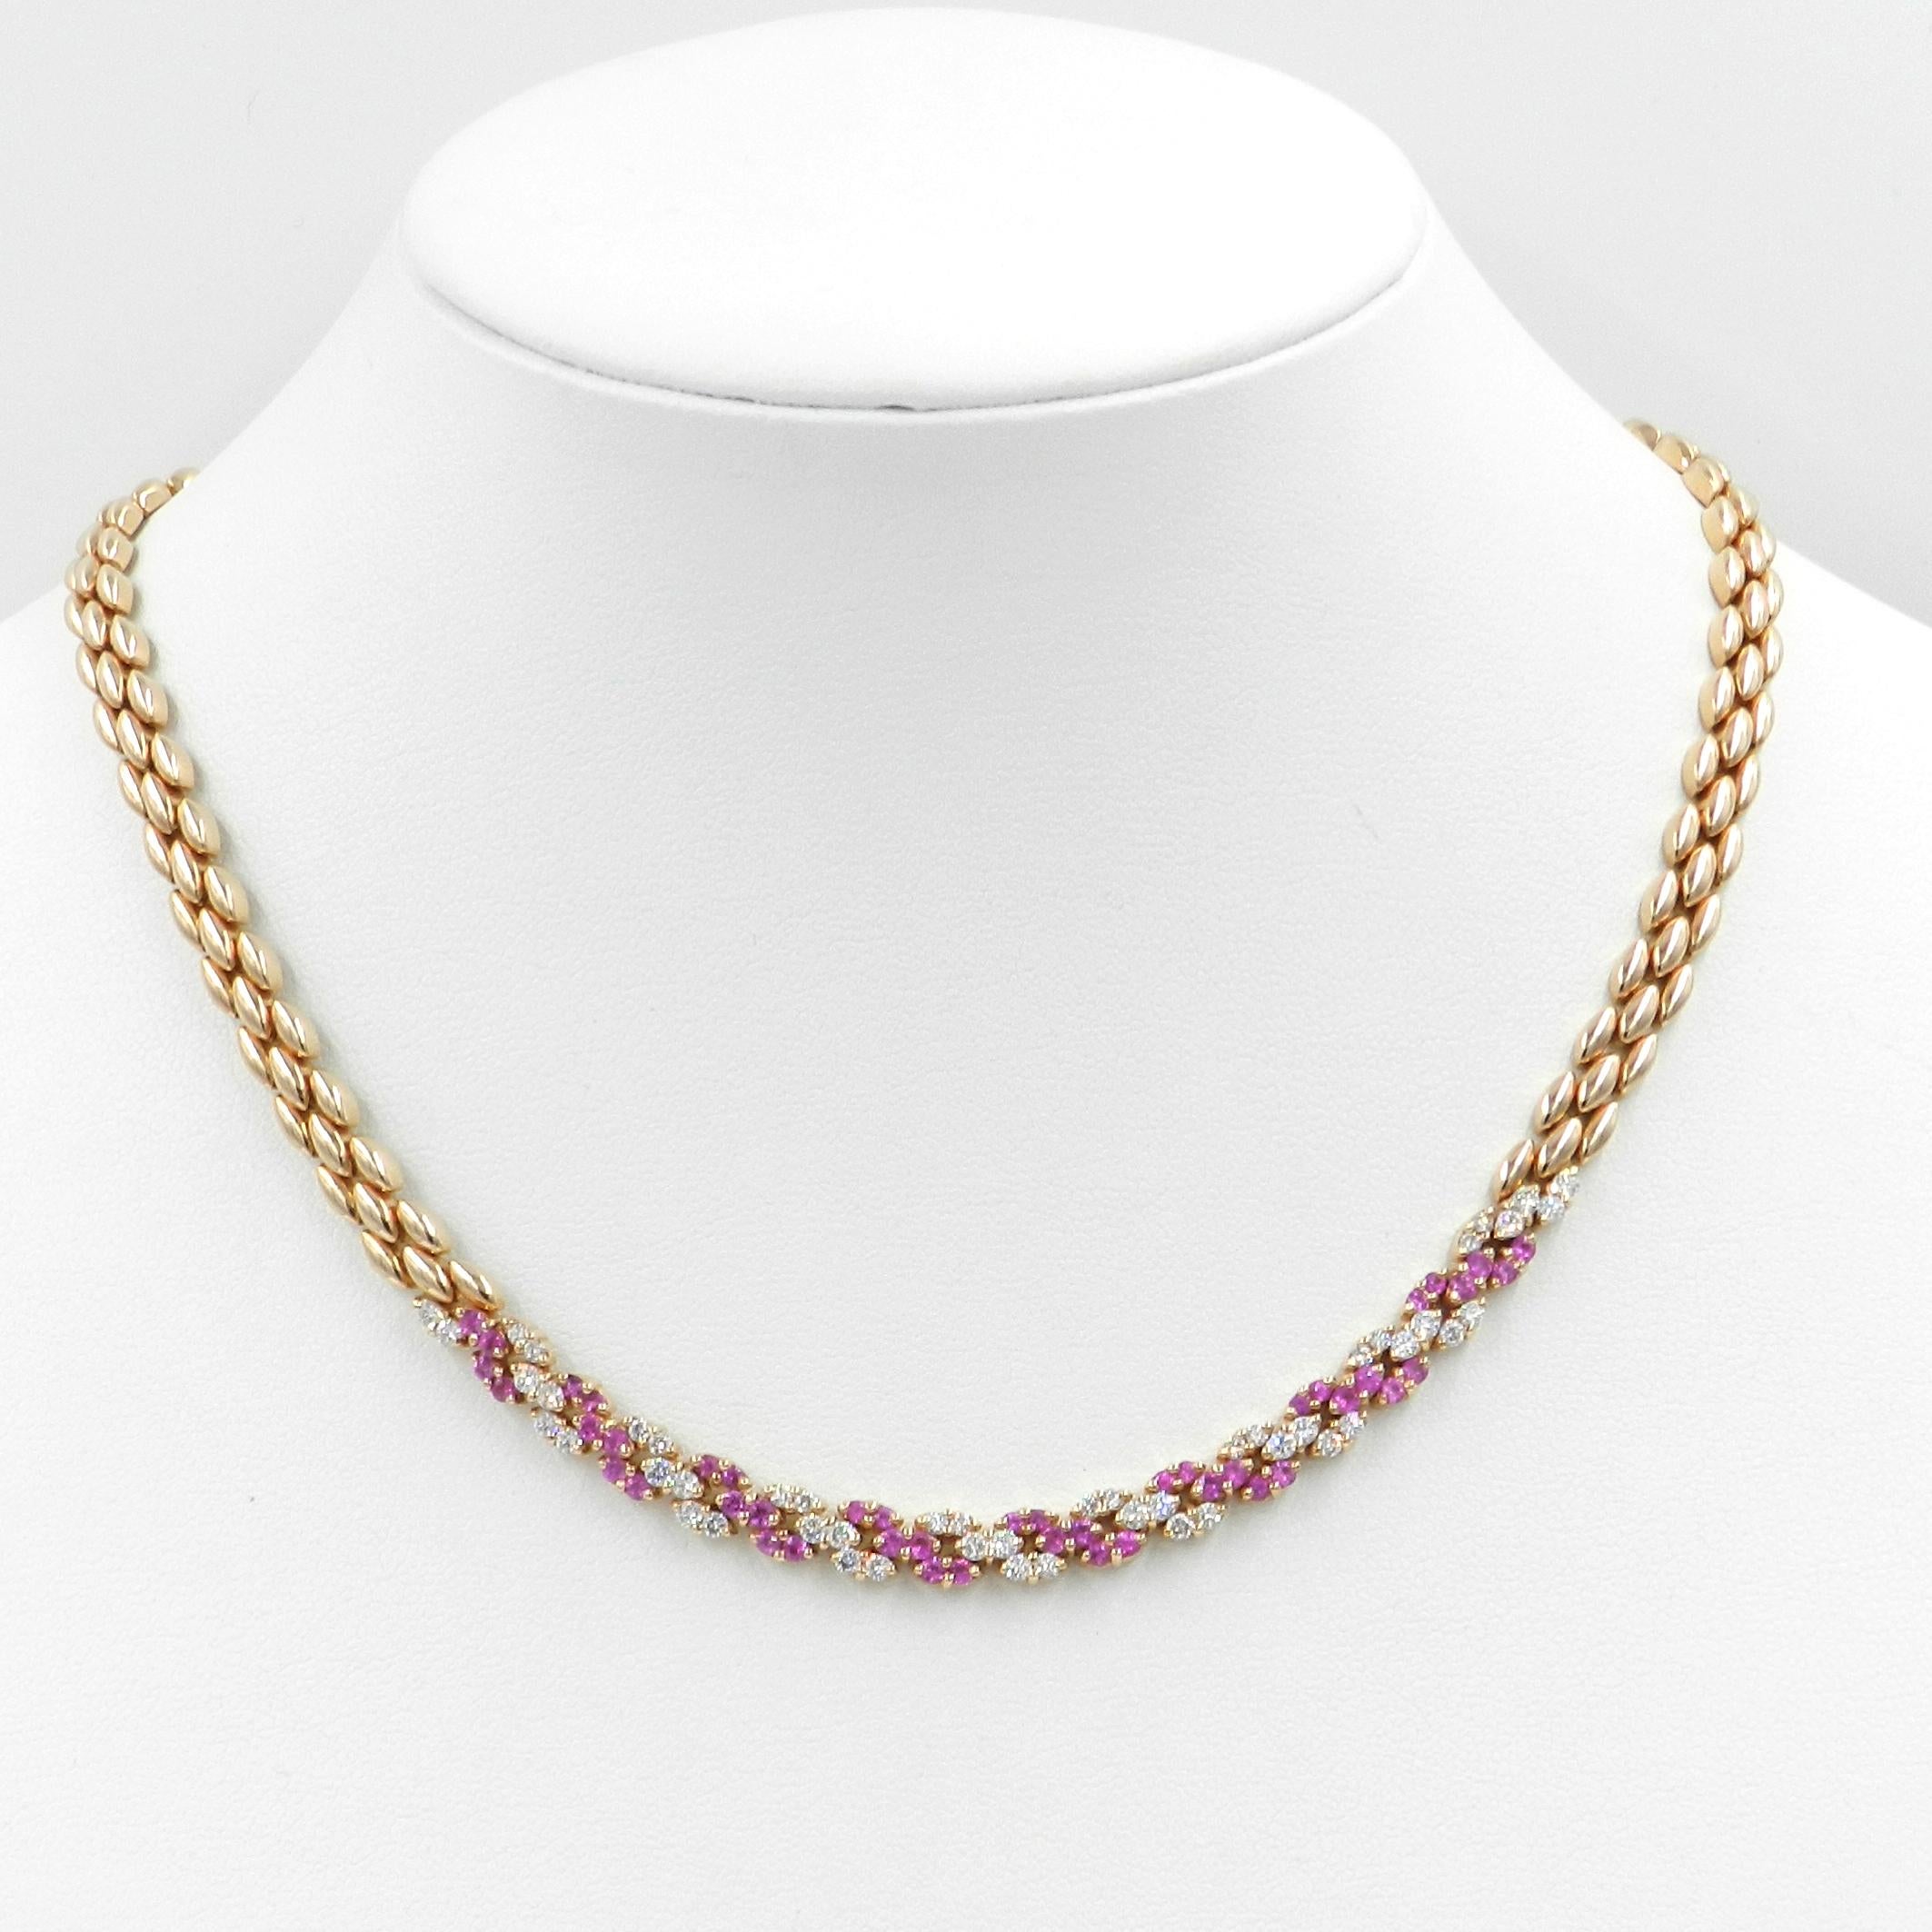 18KT Rose Gold WHITE DIAMONDS and PINK SAPPHIRES GARAVELLI NECKLACE
Lenght  16 inches - centimeters 40 
GOLD gr  : 46,71
WHITE DIAMONDS ct : 0,86
PINK SAPPHIRES ct  : 1,19